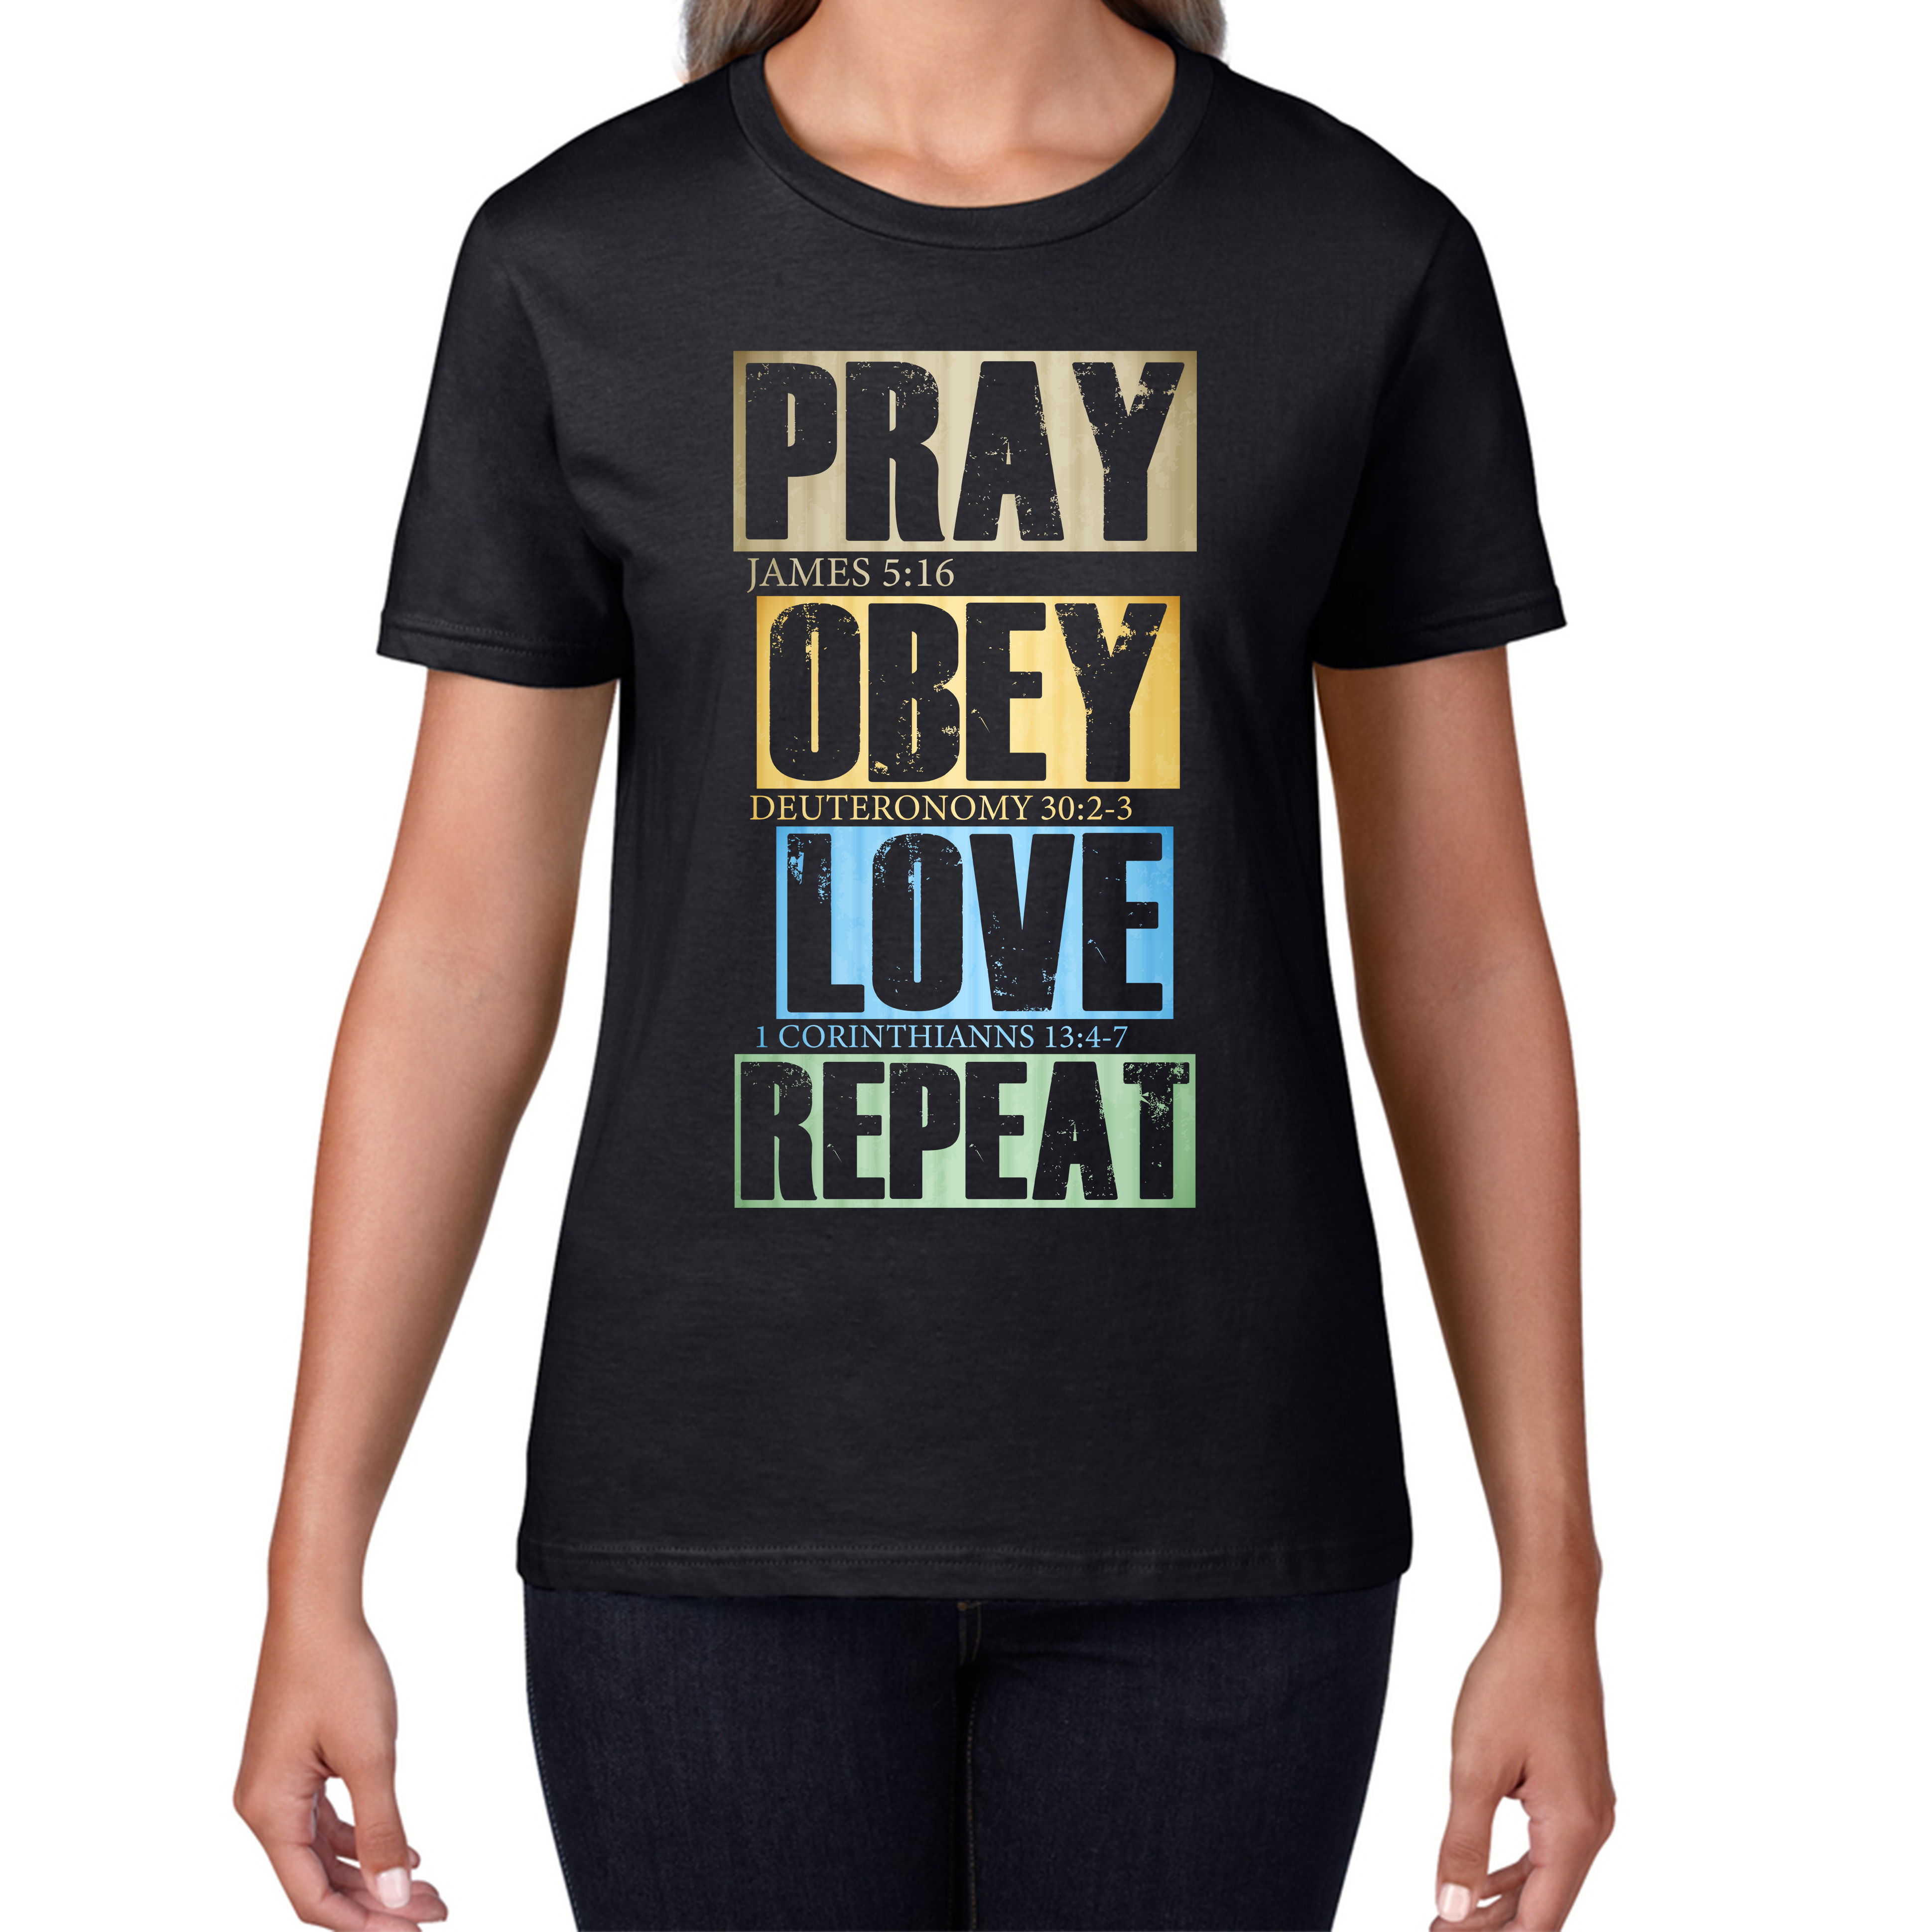 Pray Obey Love Repeat Vintage Christian Bible Christianity Womens Tee Top